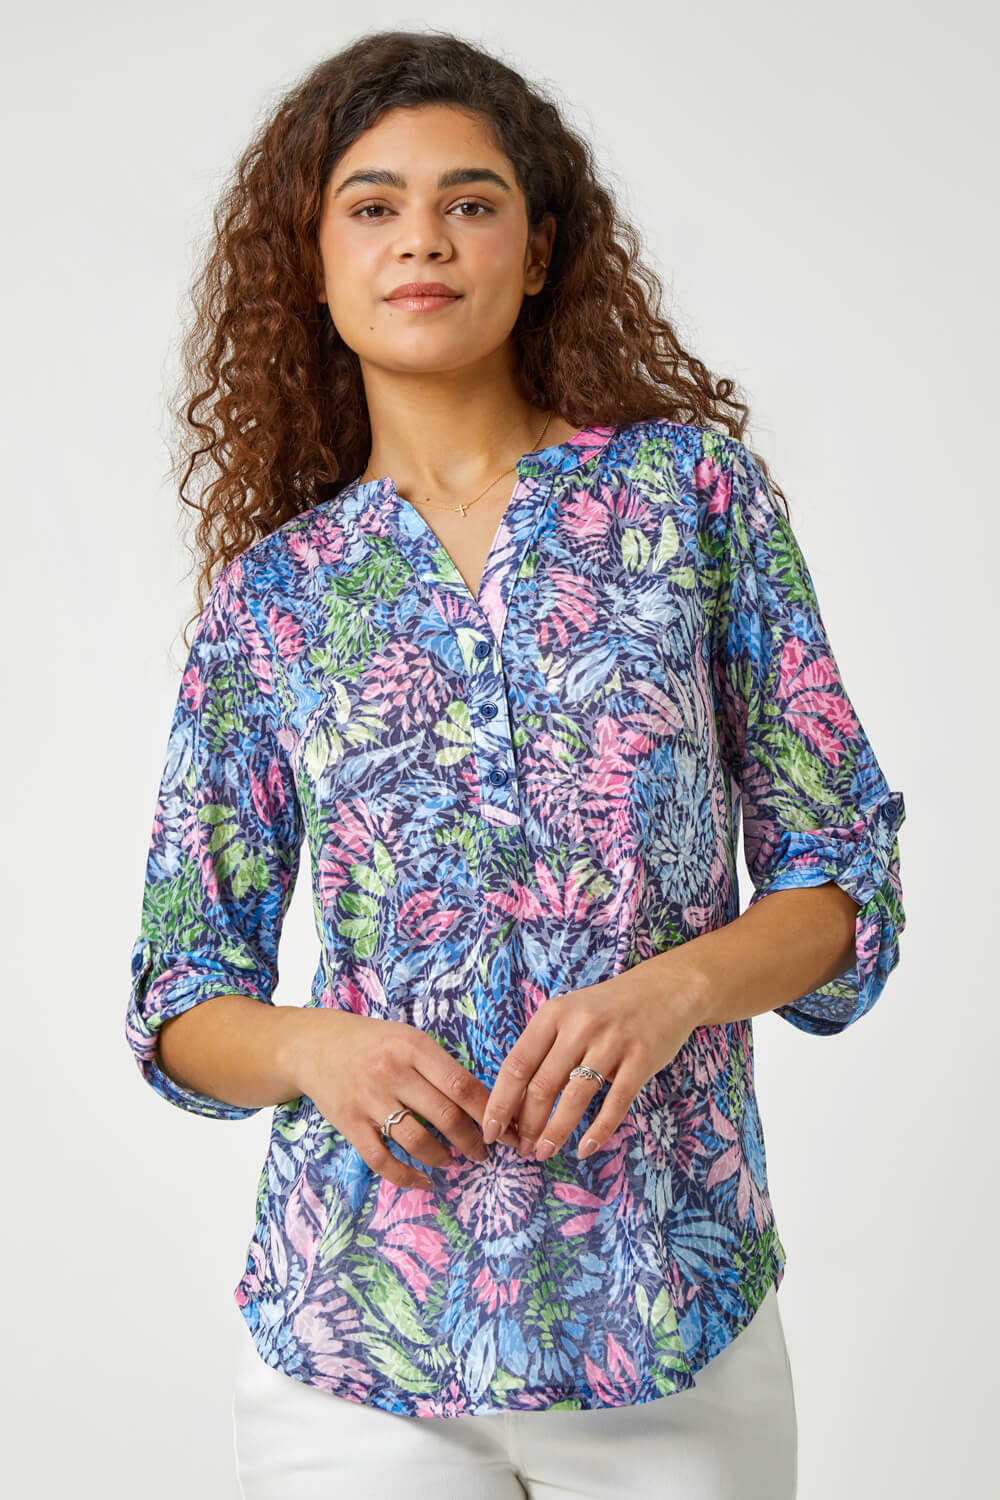 PINK Textured Floral Print Stretch Shirt, Image 4 of 5